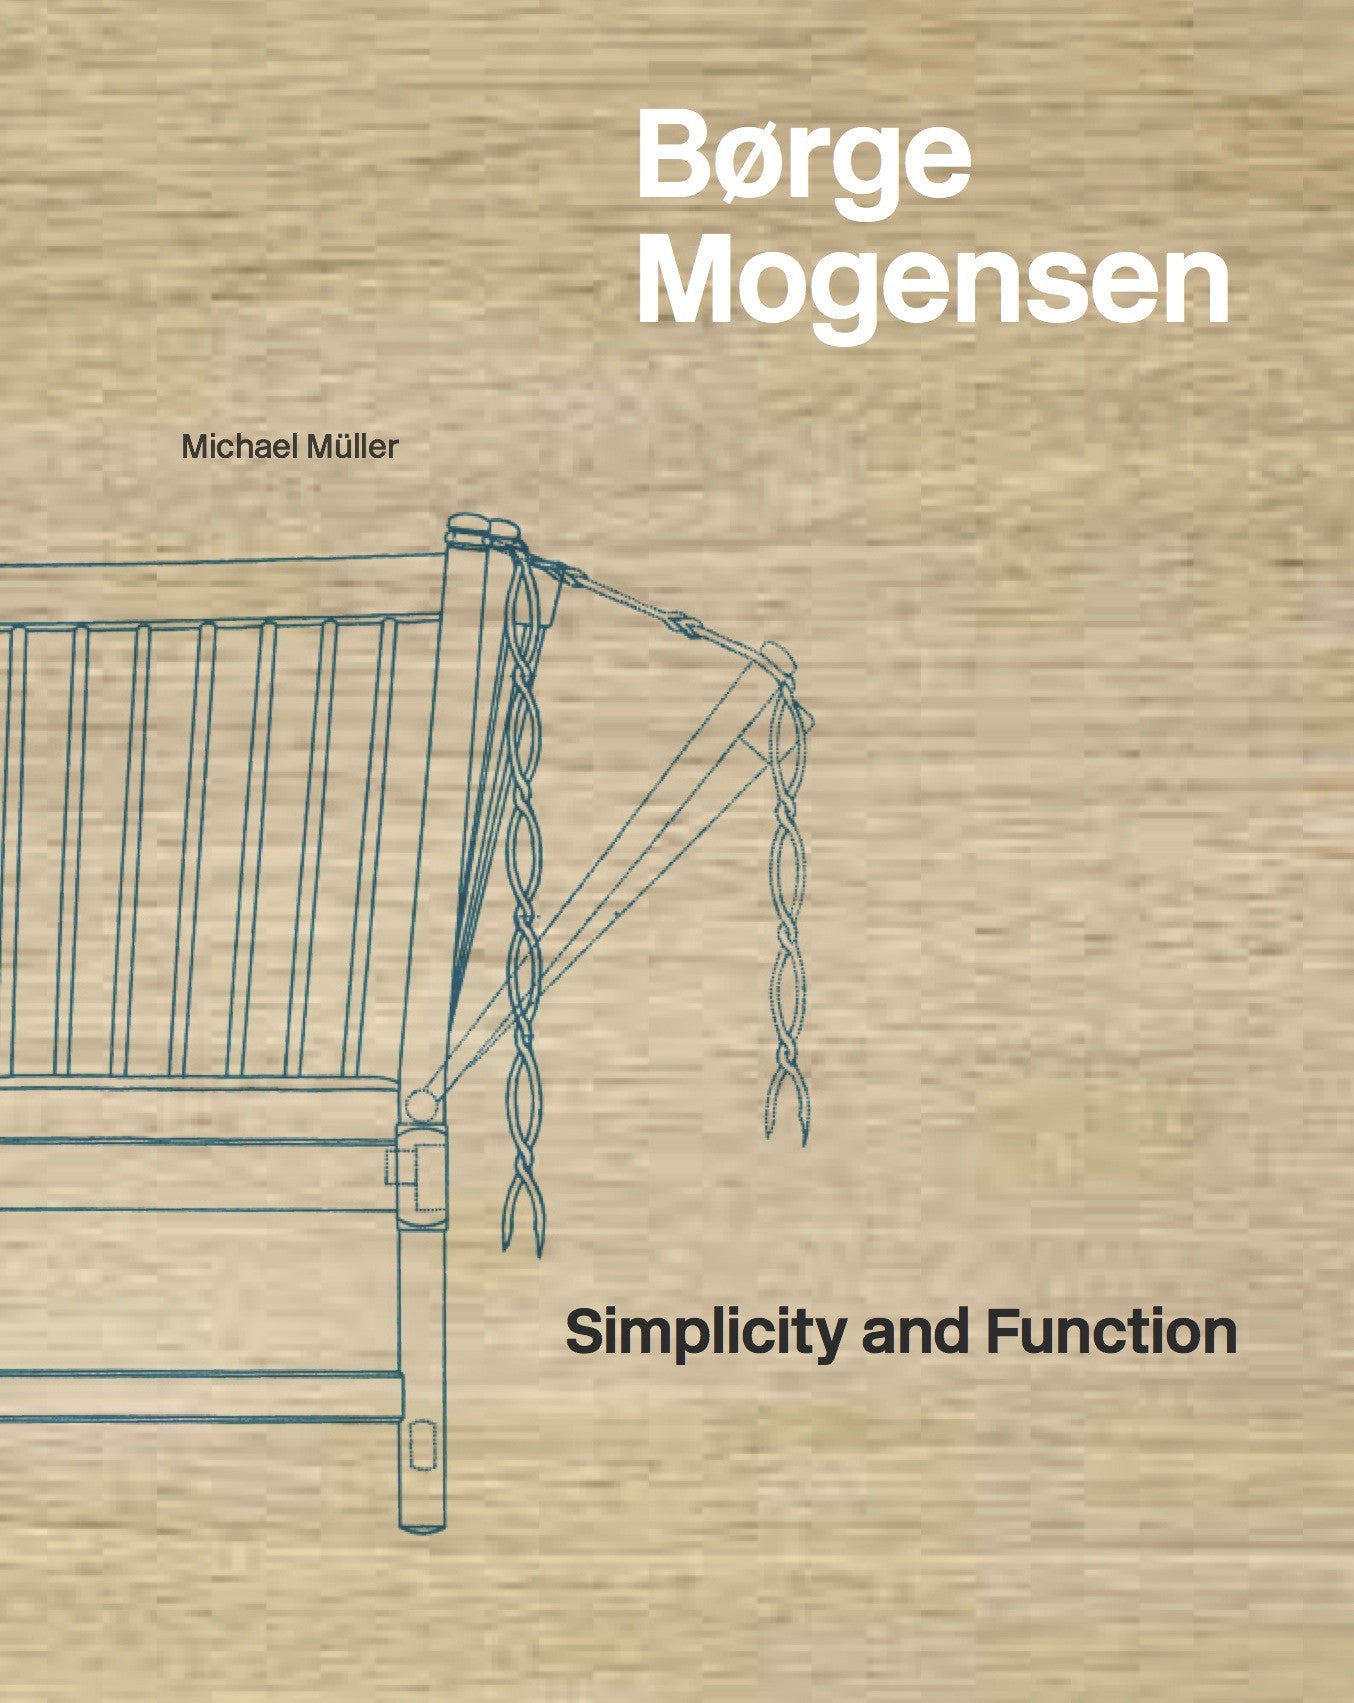 Børge Mogensen - Simplicity and Function